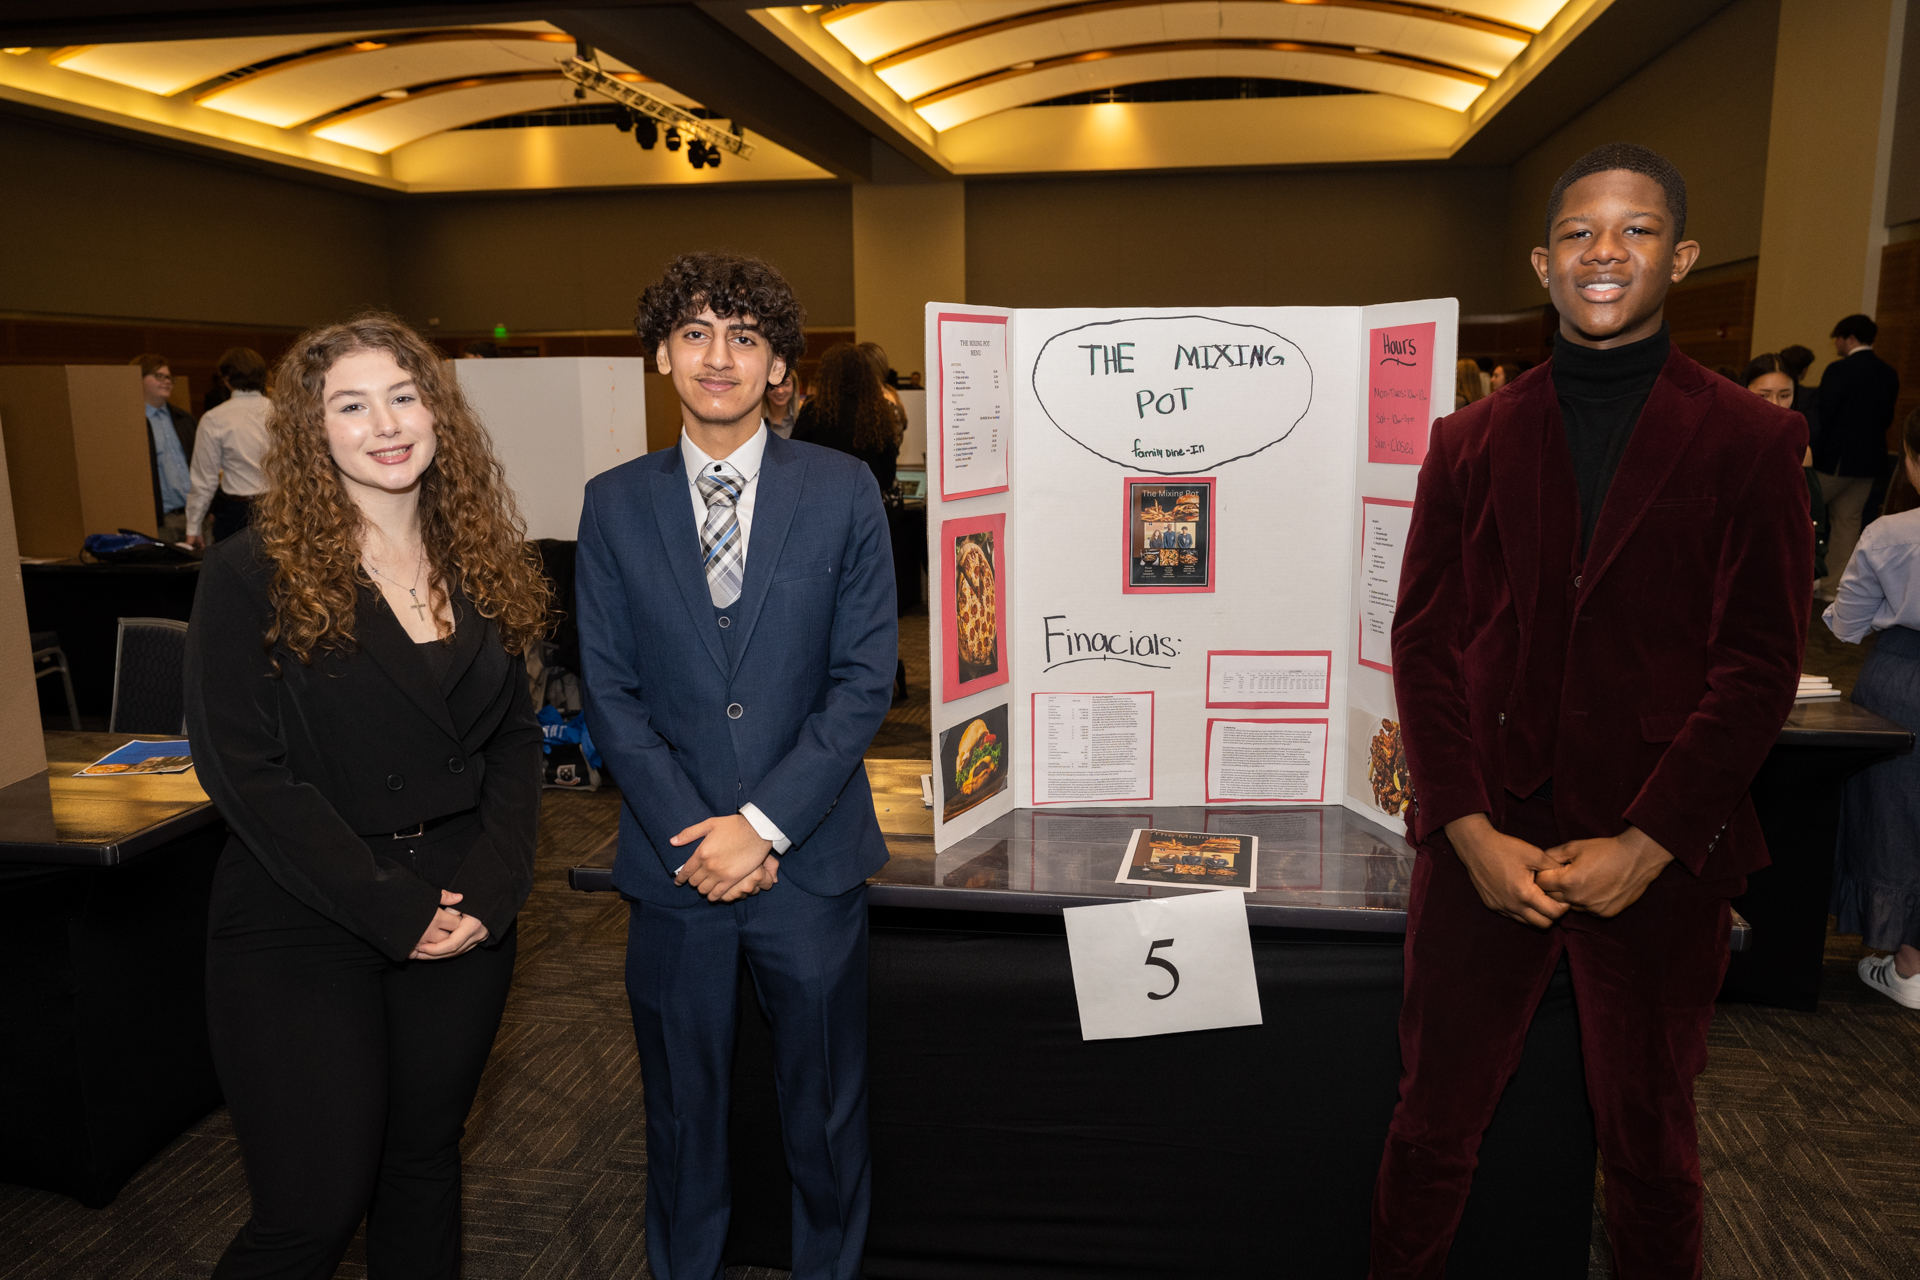 3 highschool students stand in front of a poster describing their business. The poster reads, "The Mixing Pot".